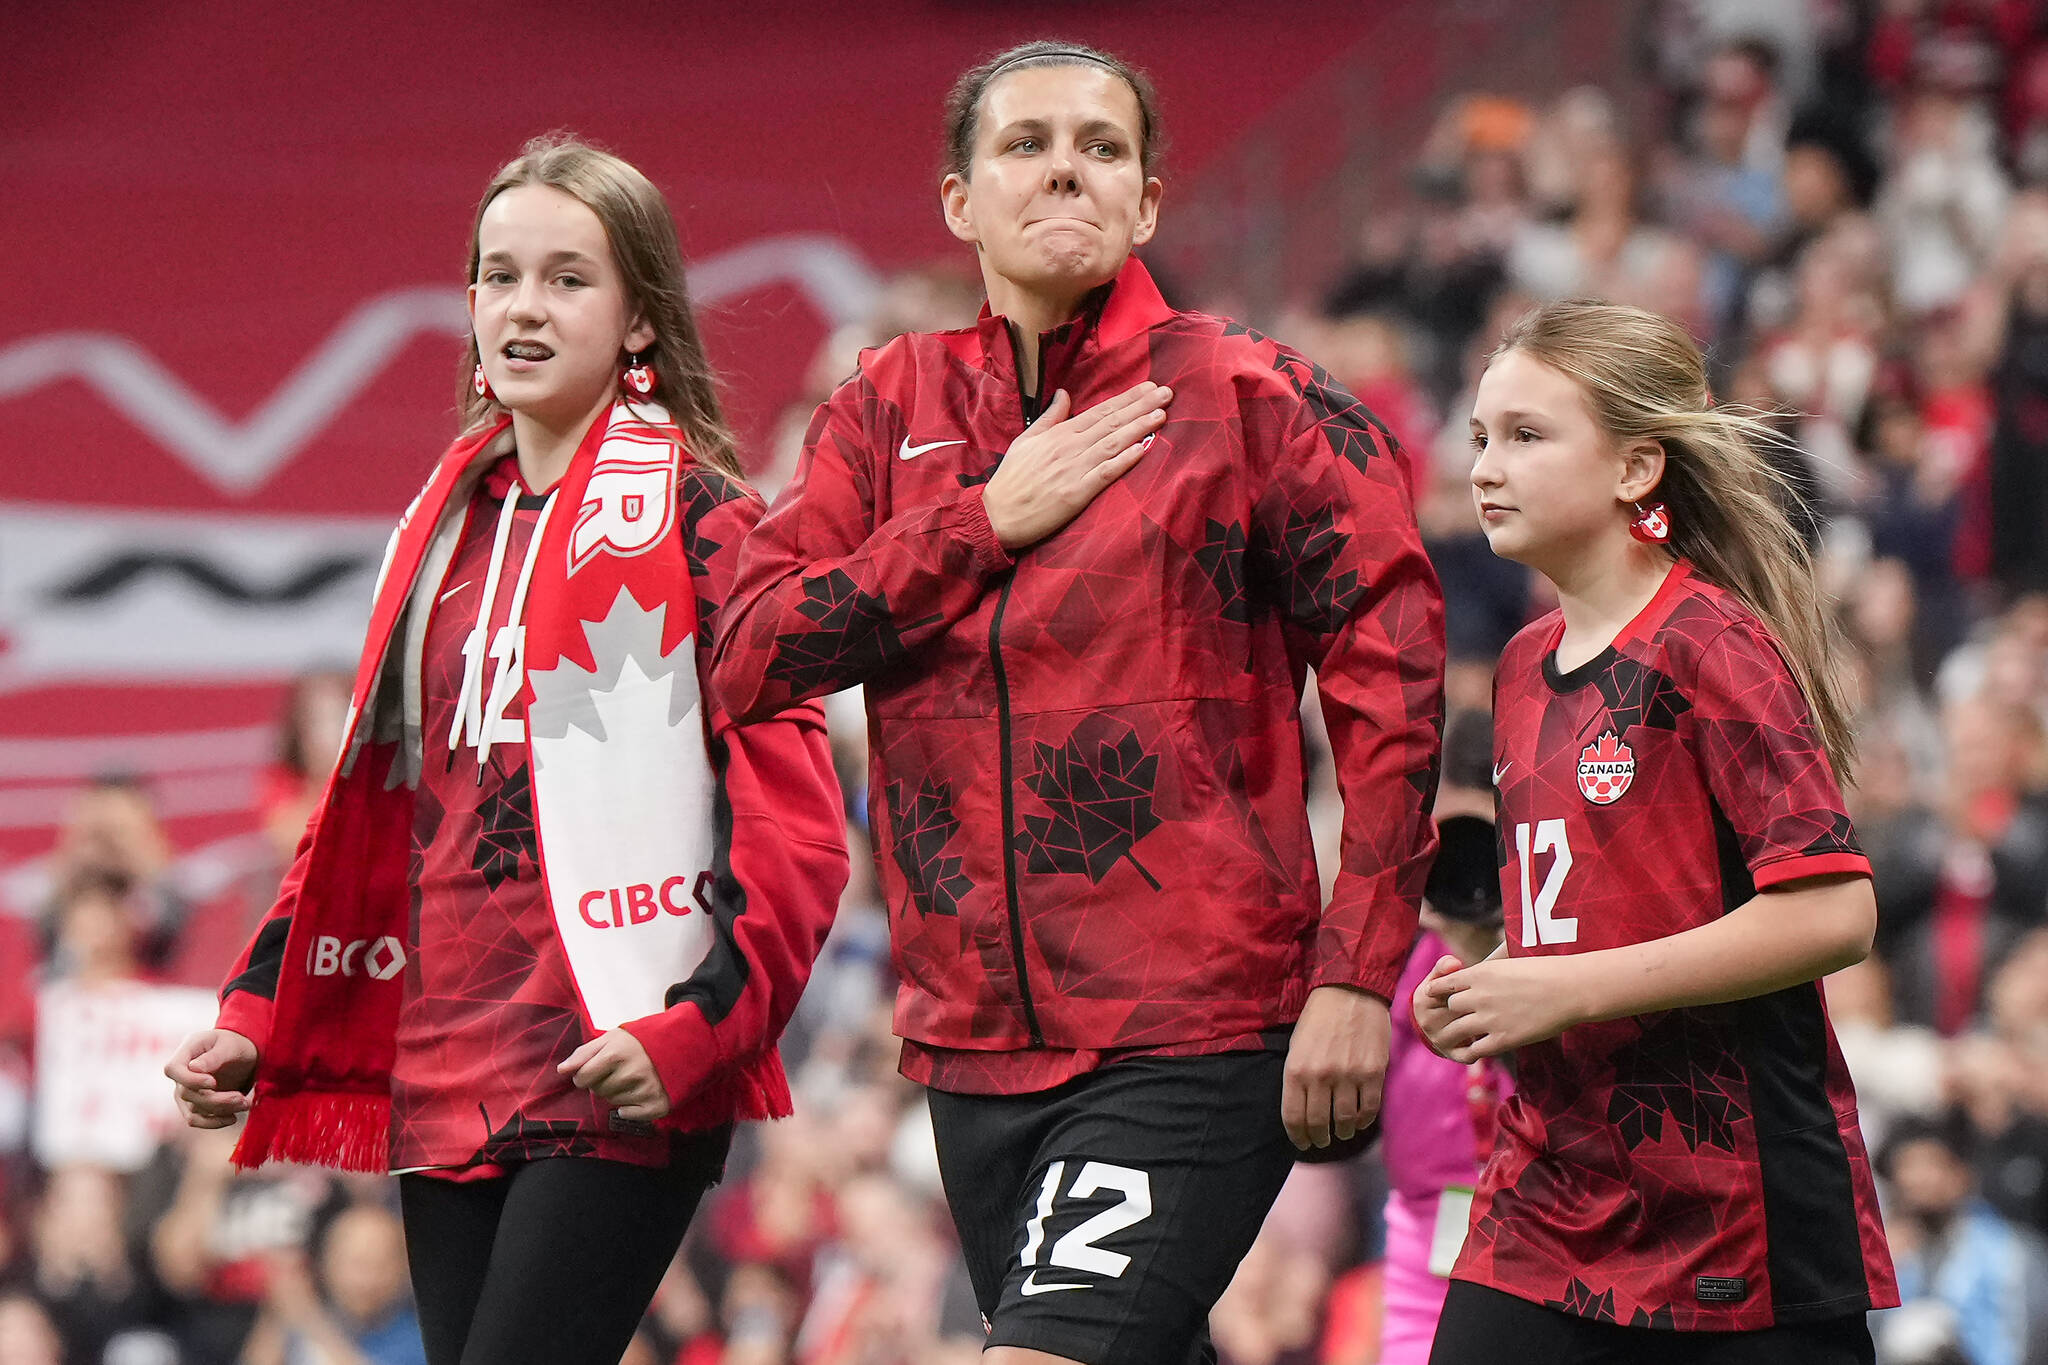 Canada’s national women’s soccer team captain Christine Sinclair reacts as she walks onto the field with her nieces Kaitlyn and Kenzie to be honoured before playing a friendly against Australia in her final international soccer match, in Vancouver, on Tuesday, December 5, 2023. Sinclair, 40, is making her 331st and final appearance for Canada. THE CANADIAN PRESS/Darryl Dyck